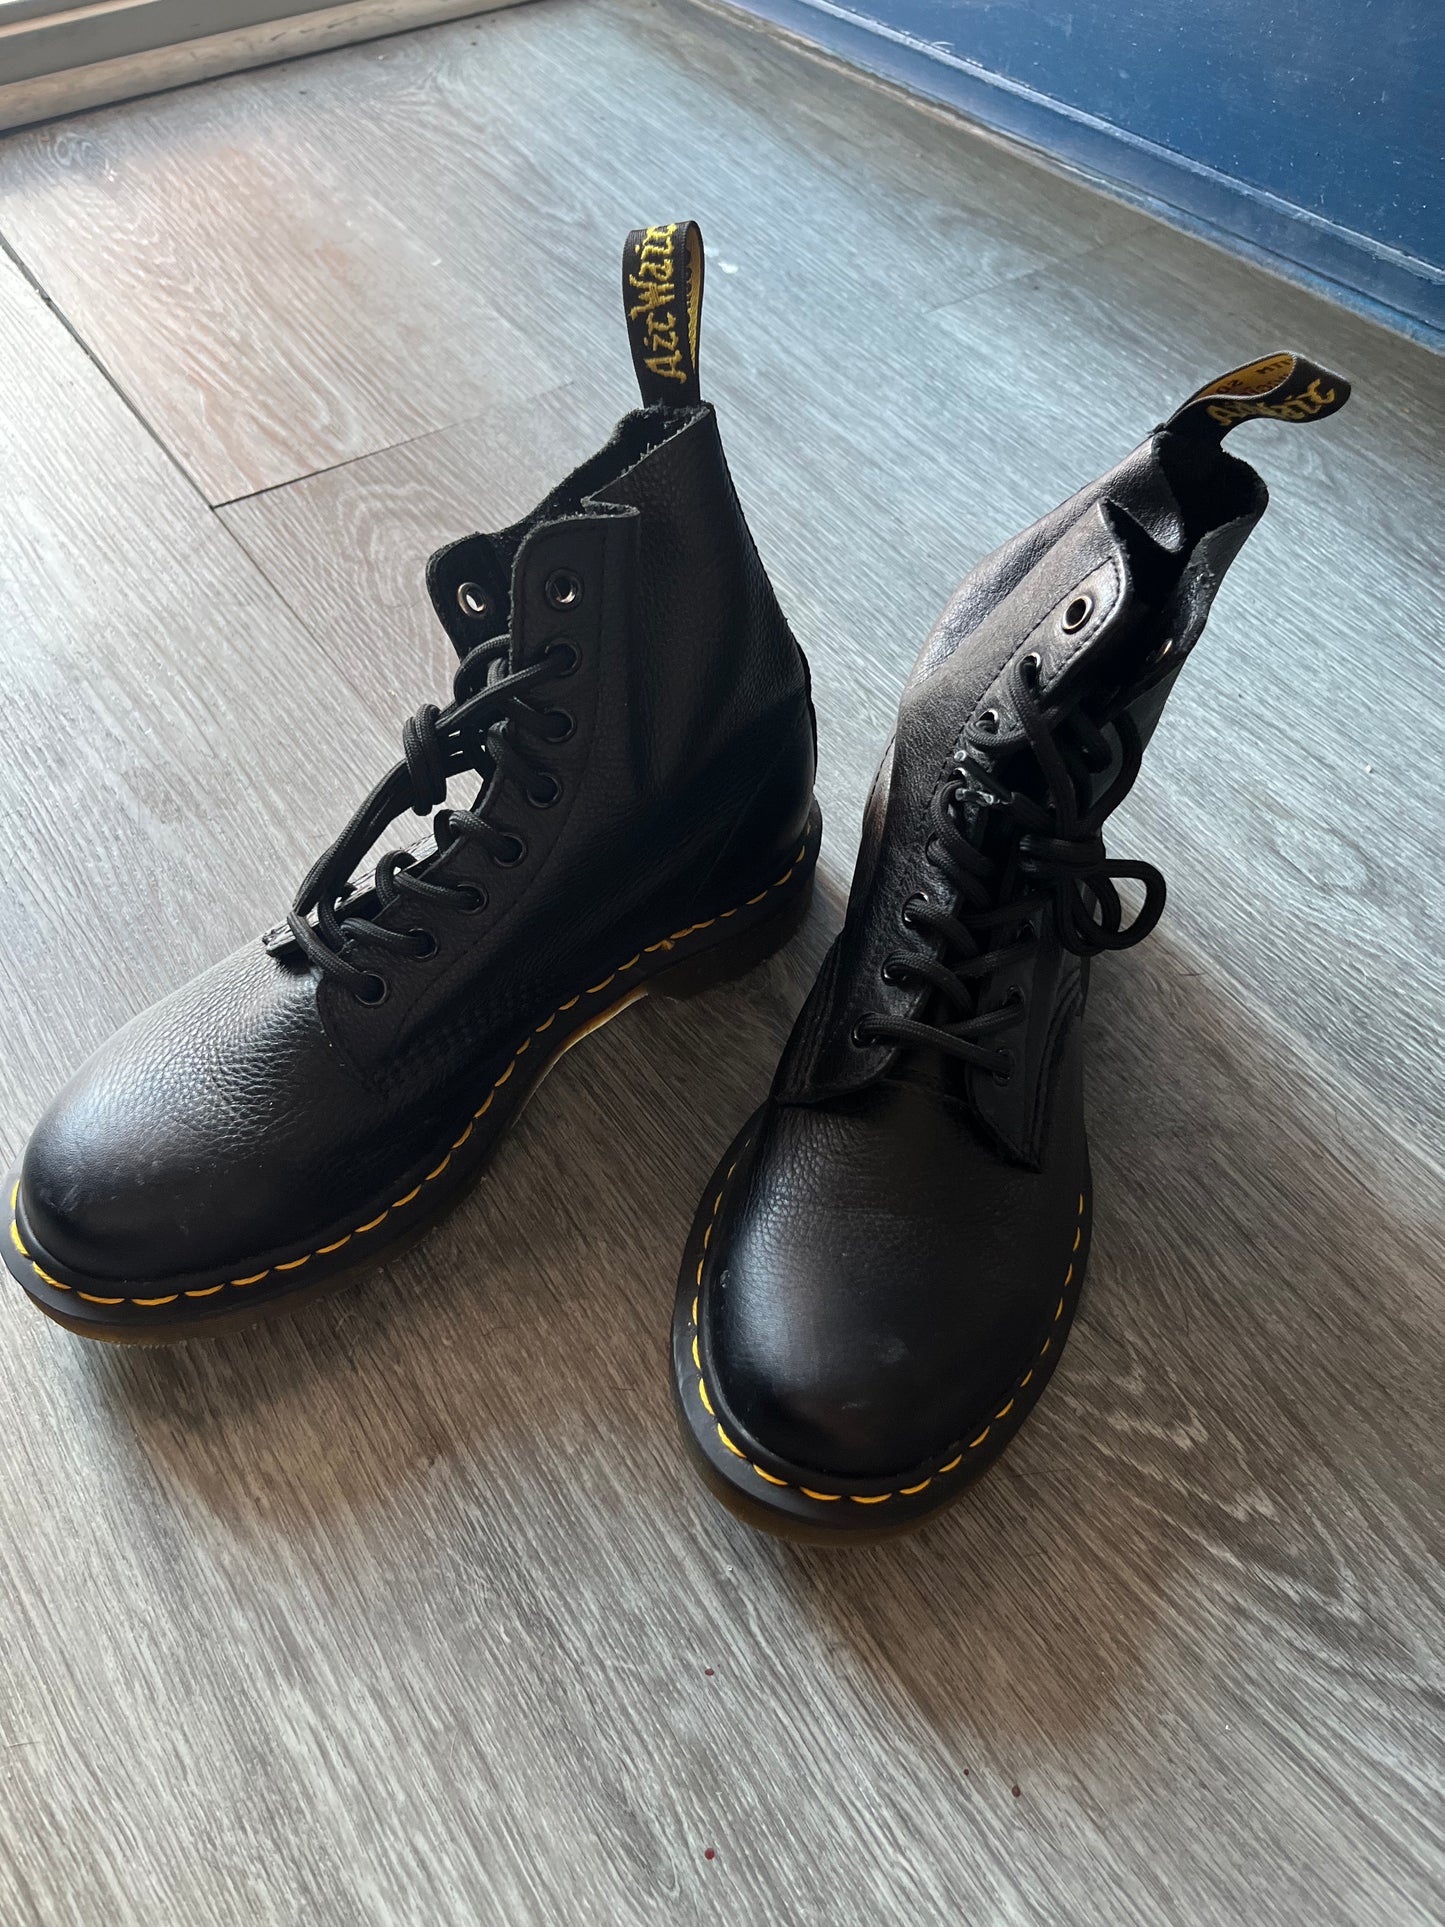 Modern Dr Marten 1460 Leather Boot / Size 8